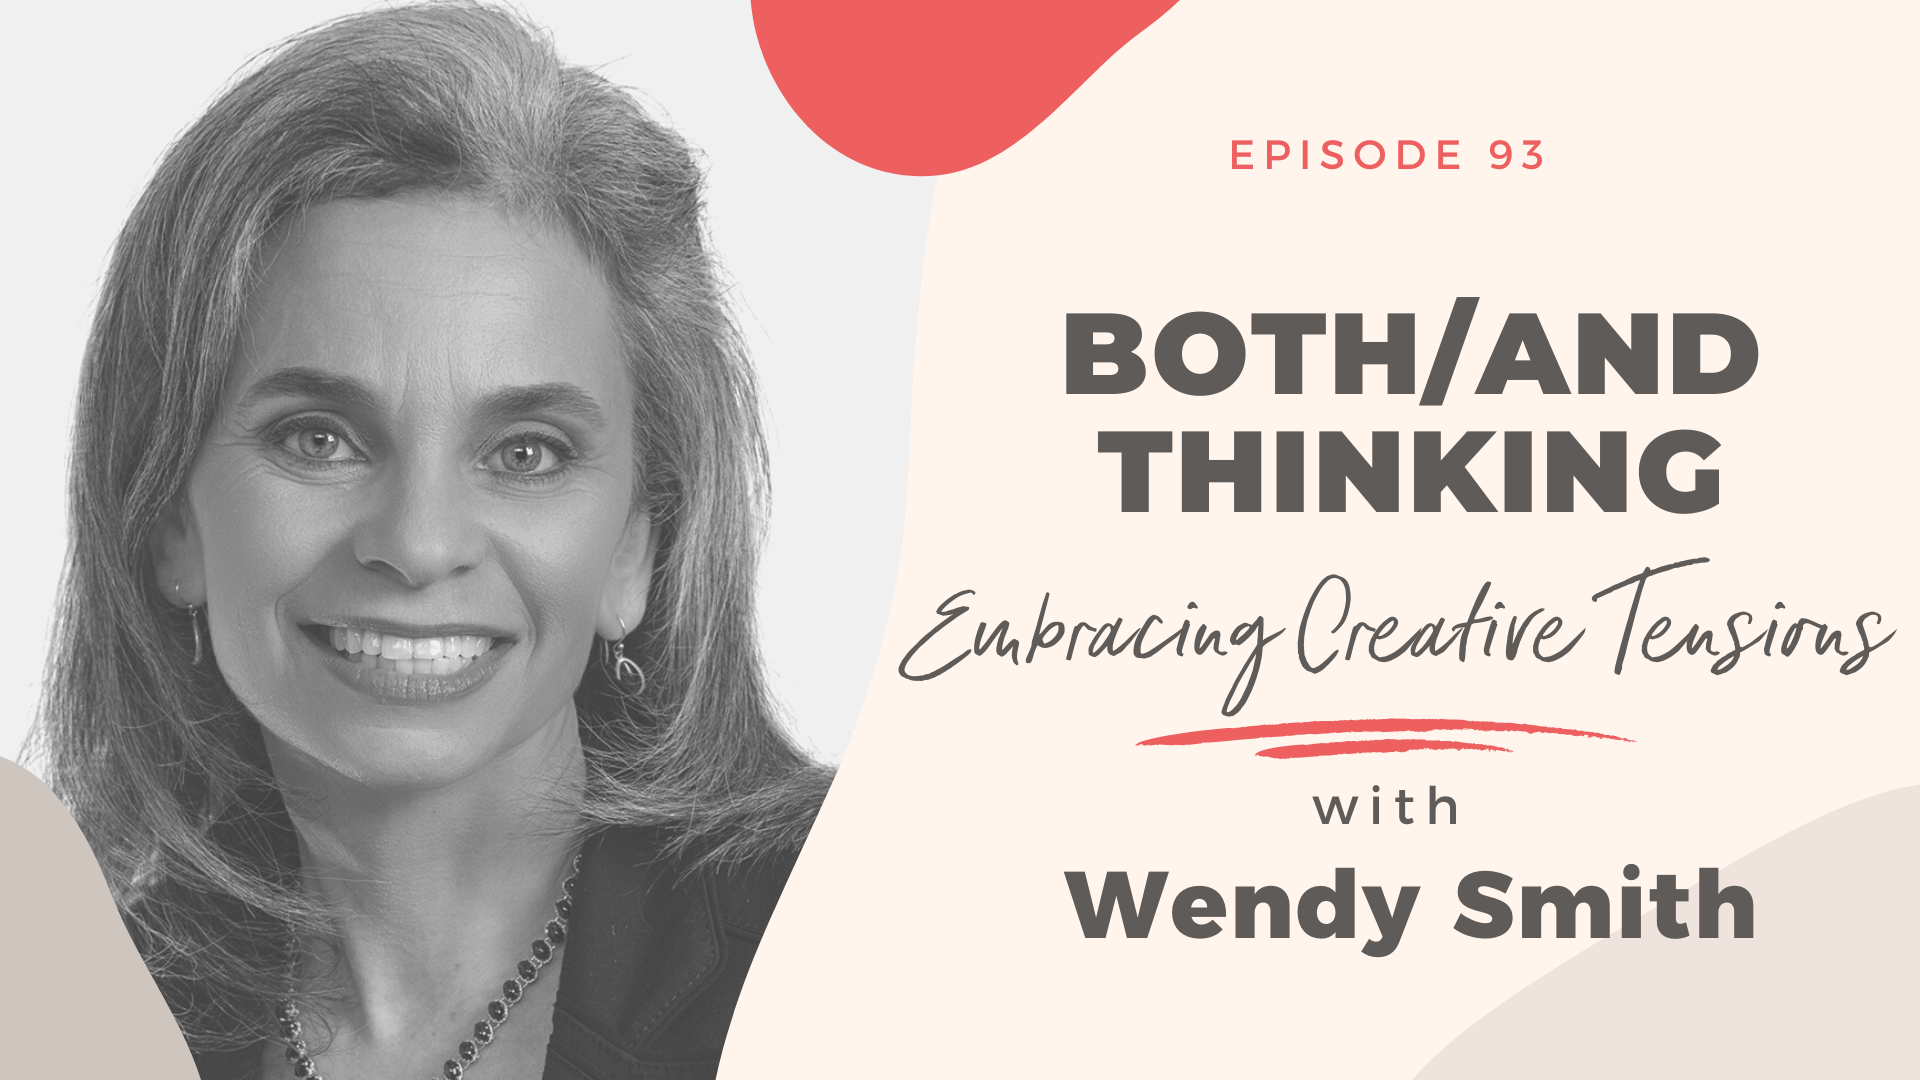 Both/And Thinking; Embracing Creative Tensions with Wendy Smith